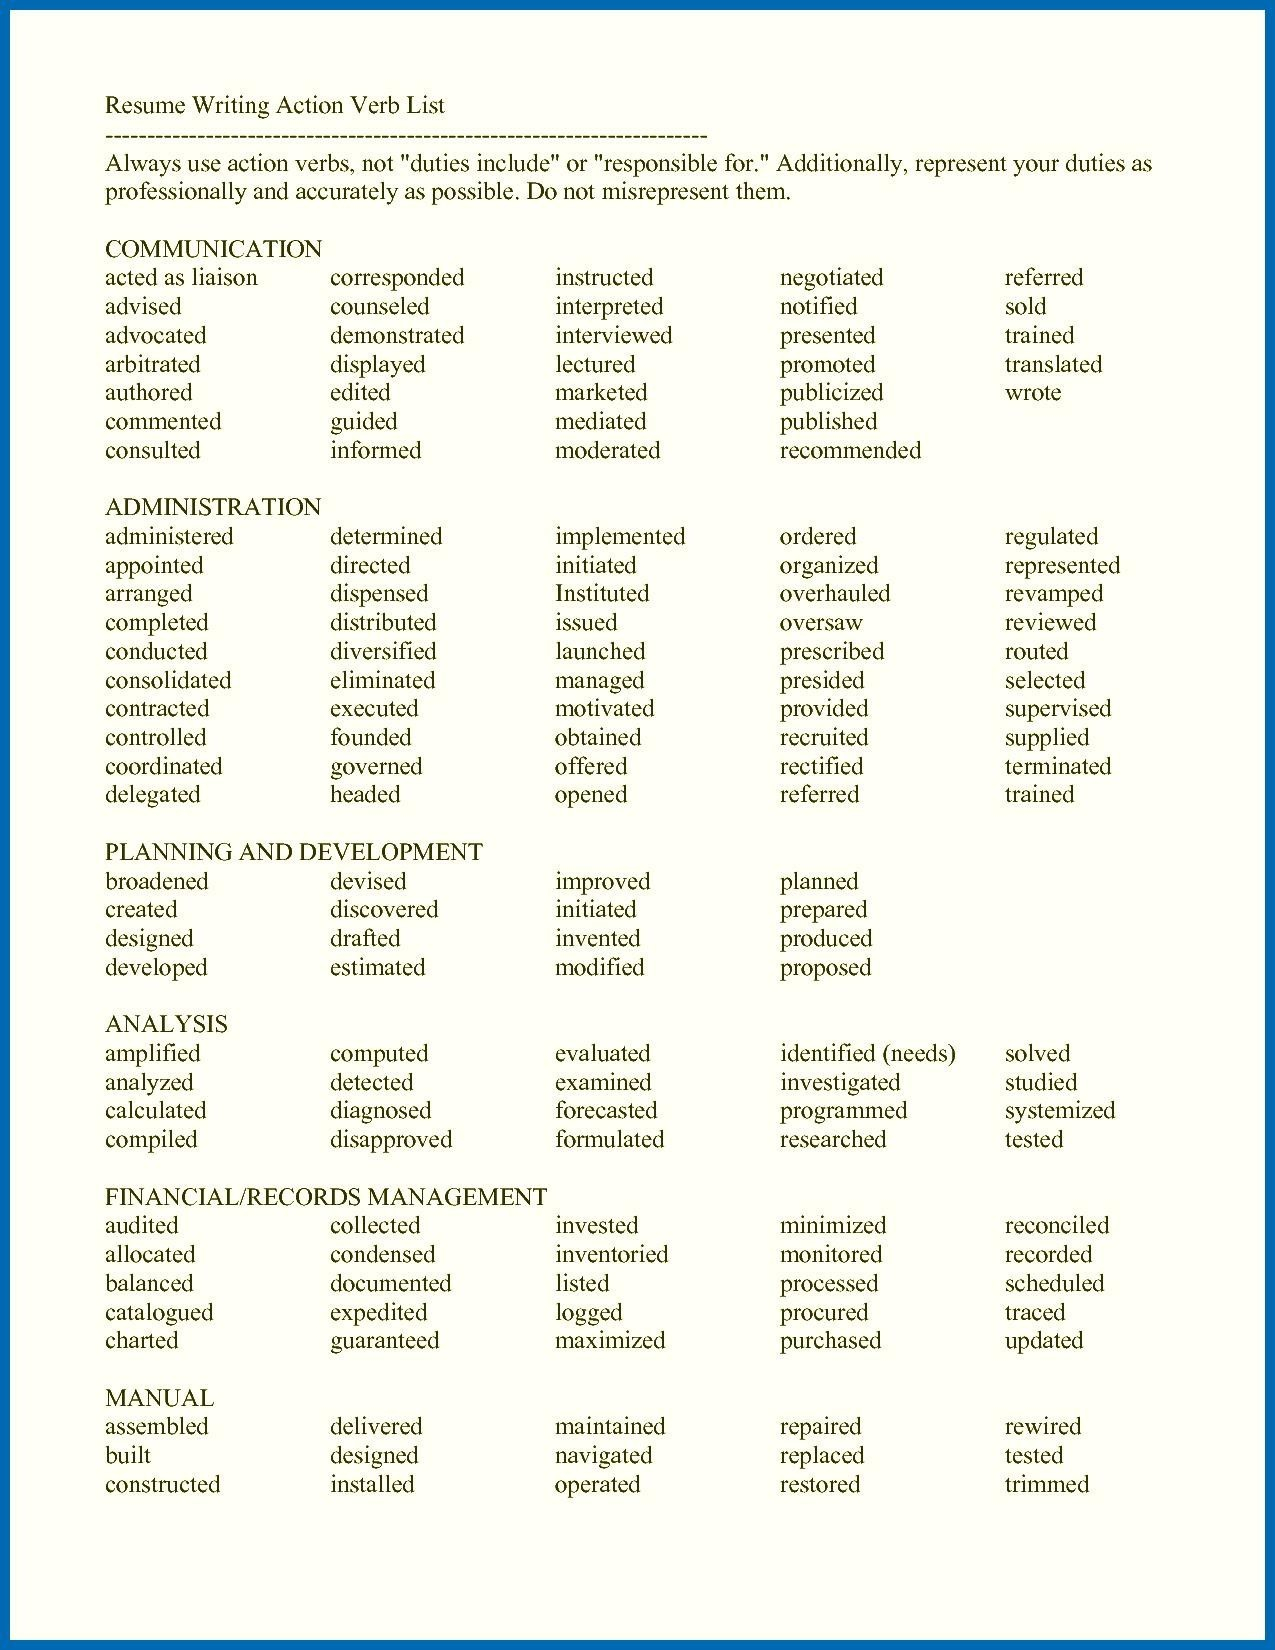 Resume Words Skills  Words To Use For A Resume Top Simple Skills Verbs Captivating Good